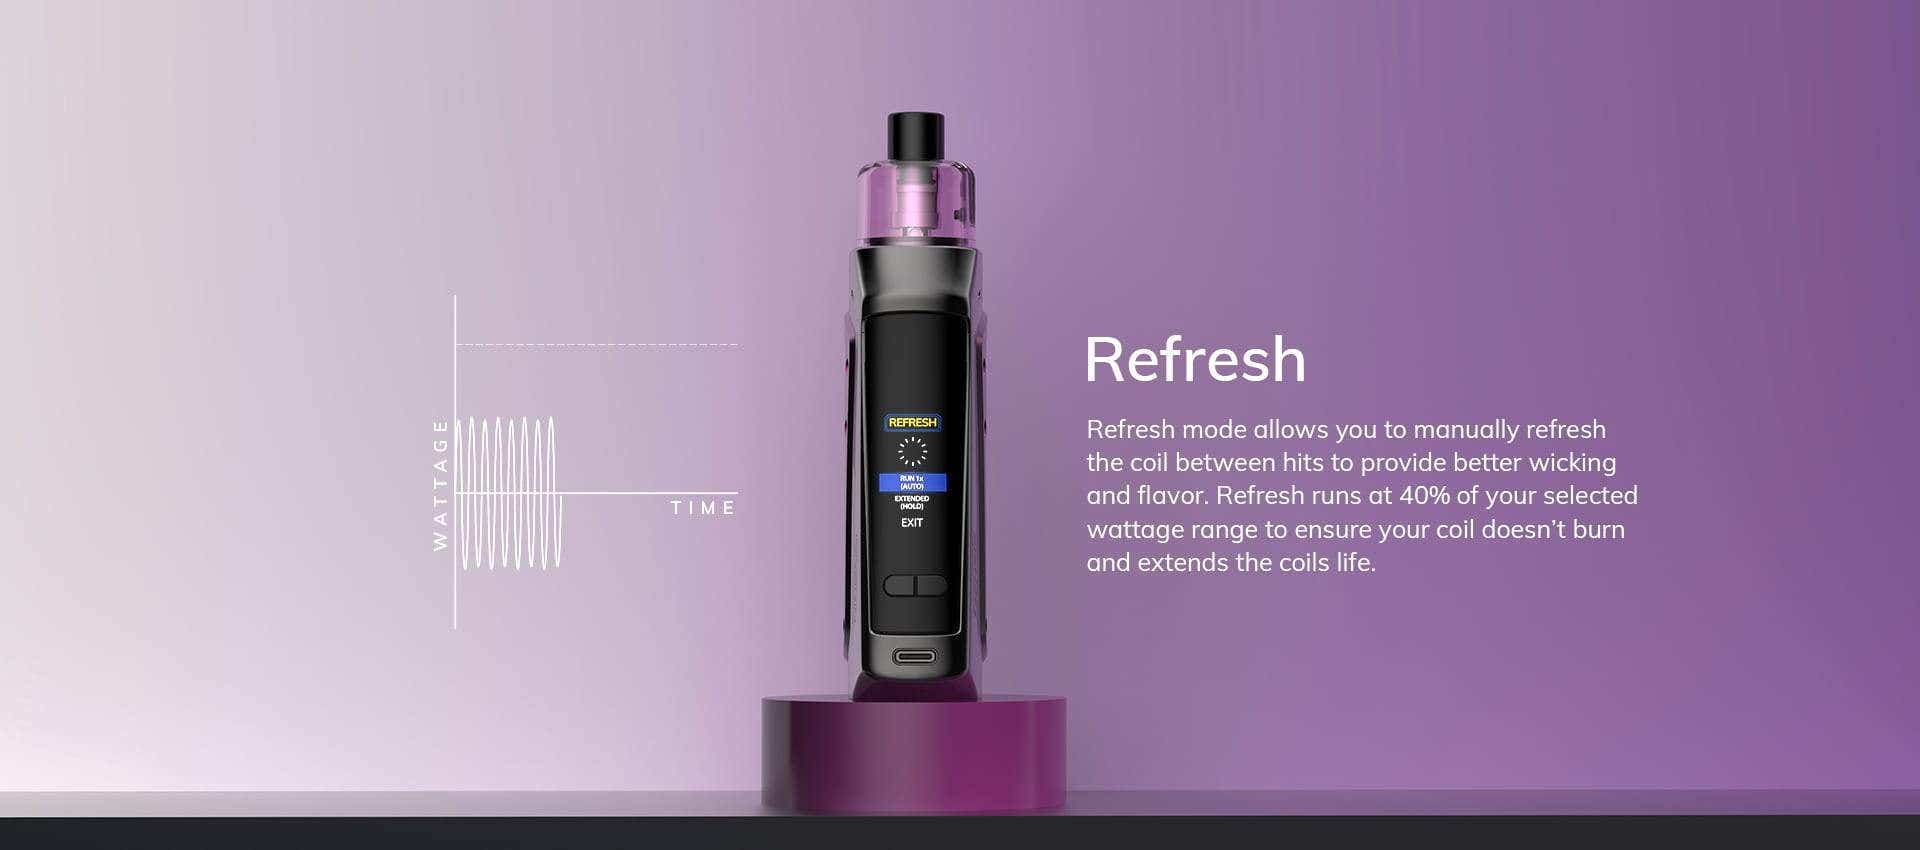 Refresh mode extends your coils life.